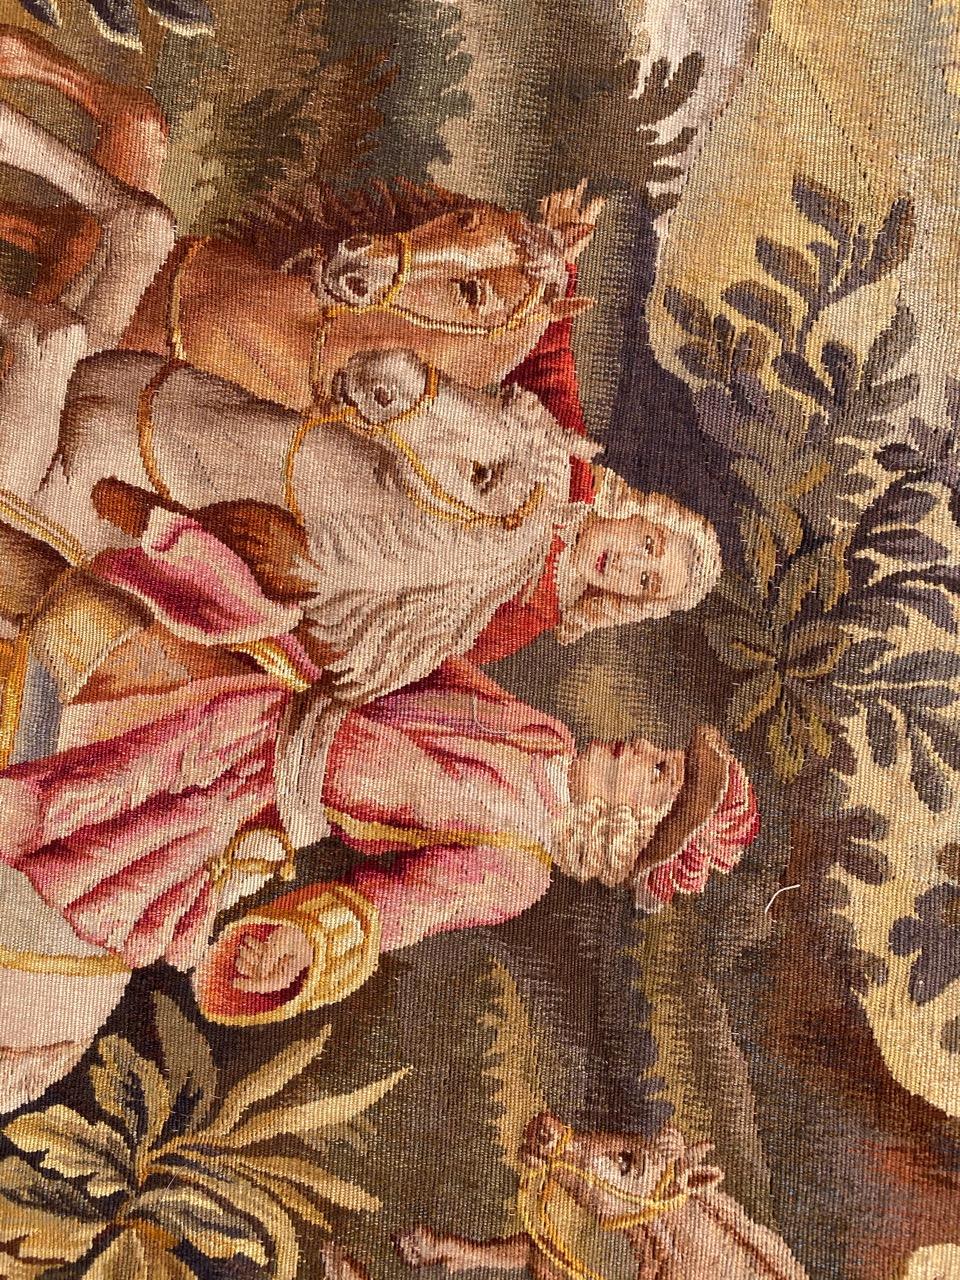 20th Century Bobyrug’s Wonderful Fine Antique French Aubusson Tapestry